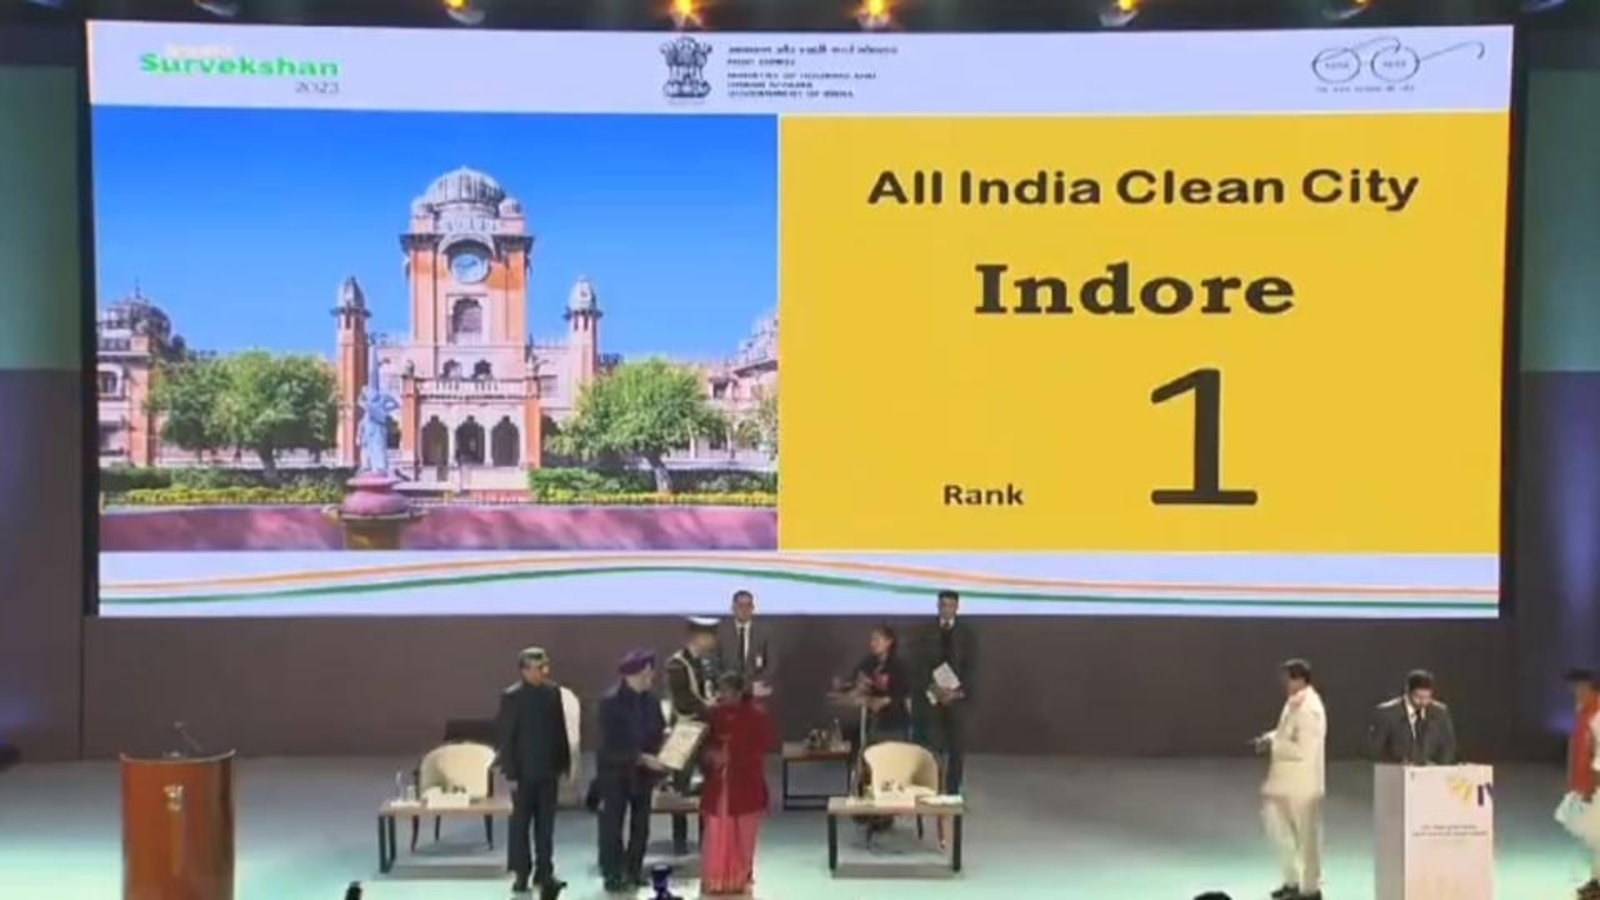 Indore again named as ‘cleanest city’ in India for seventh time in a